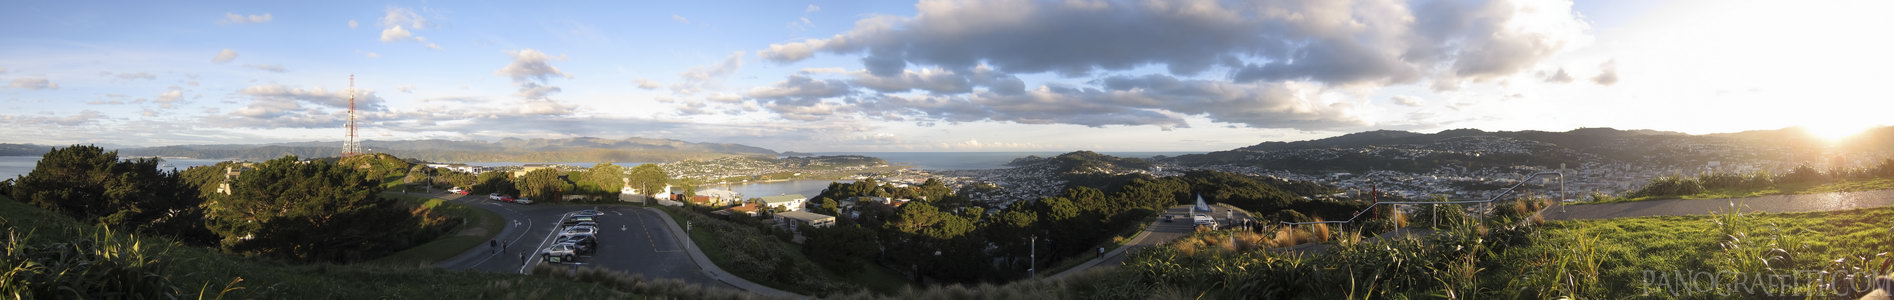 South View from Mount Victoria - 180 degree view of the south coast of Wellington from the top of Mount Victoria